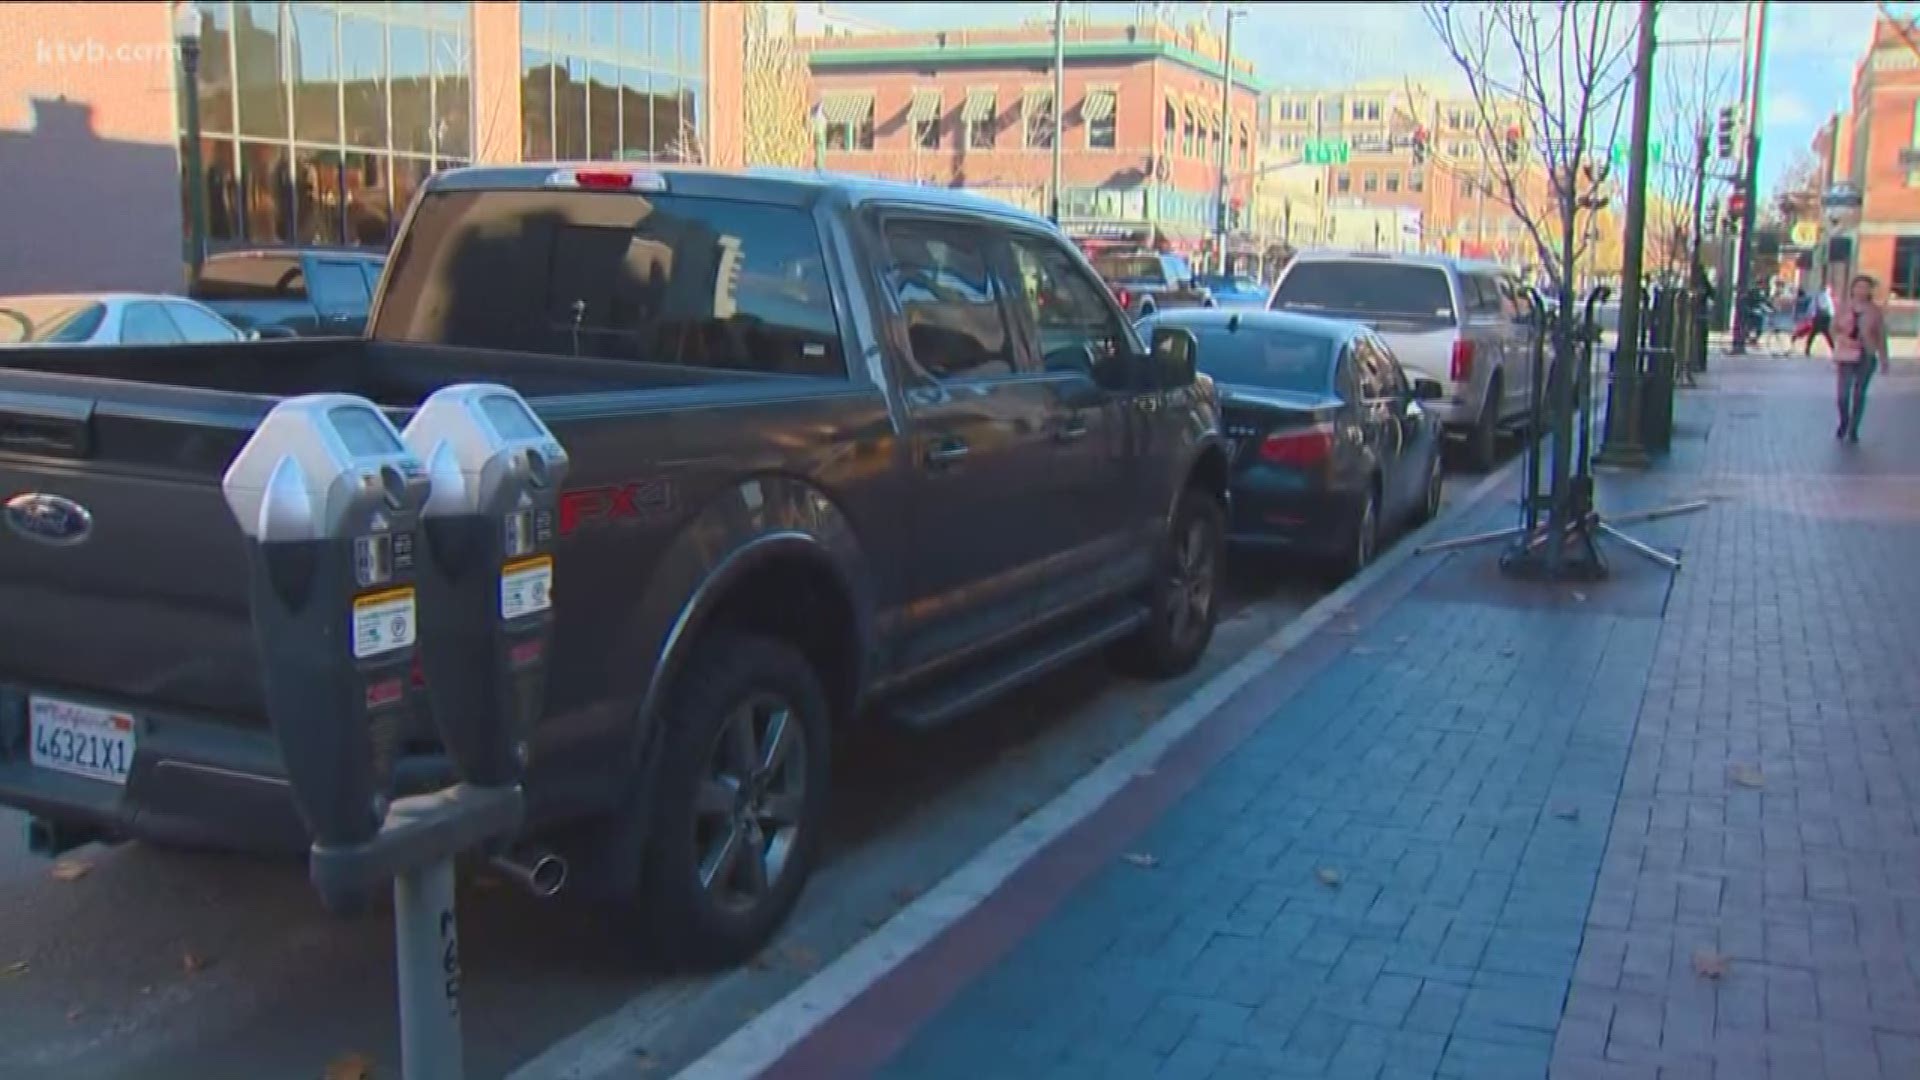 Downtown Boise unveils new pick up and drop off parking areas.